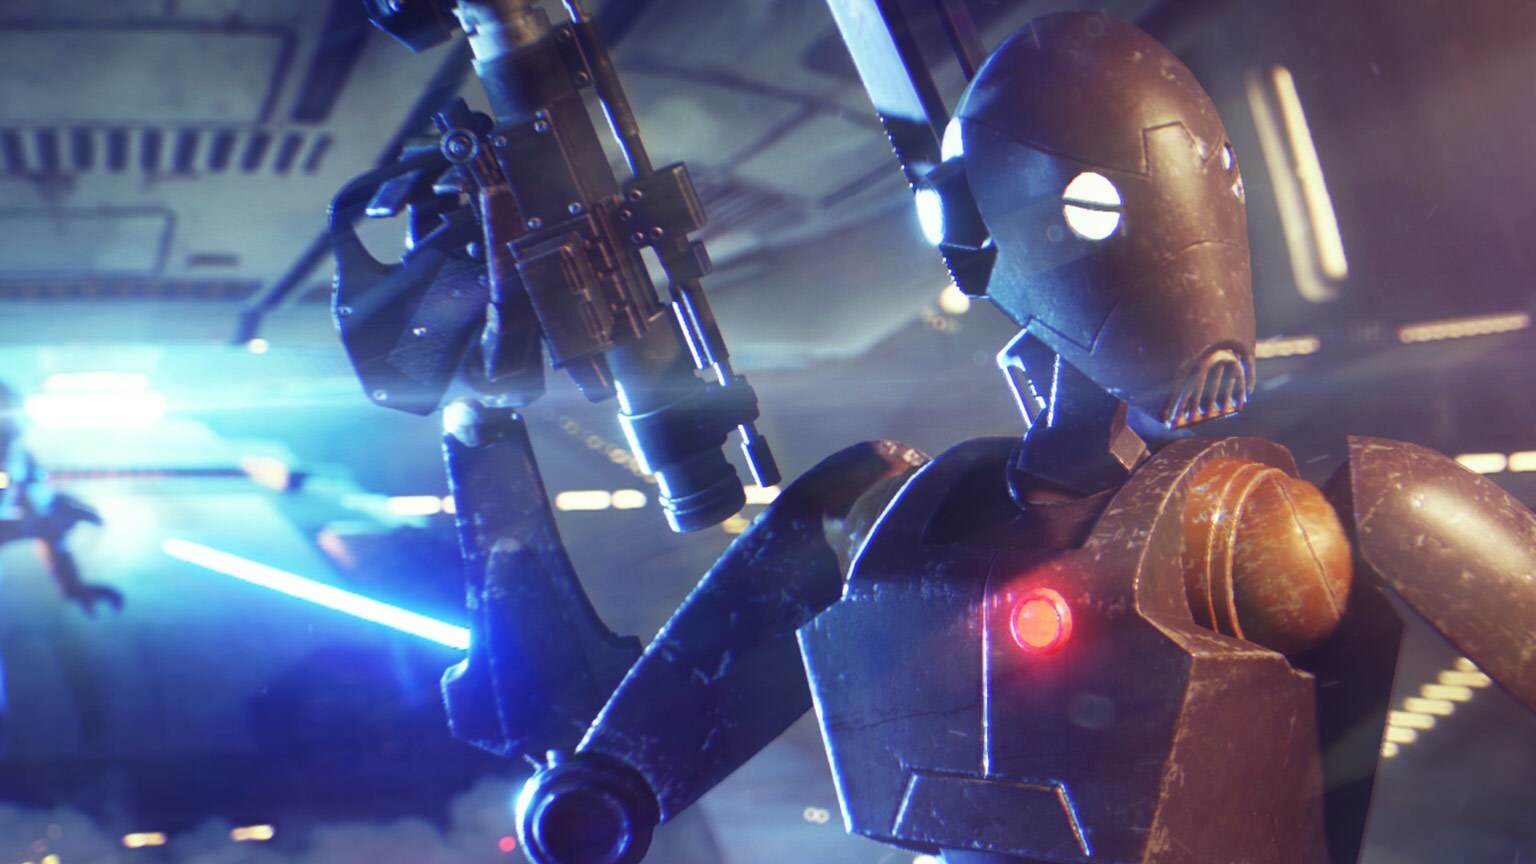 Star Wars Battlefront II Brings Players New "Capital Supremacy" Mode